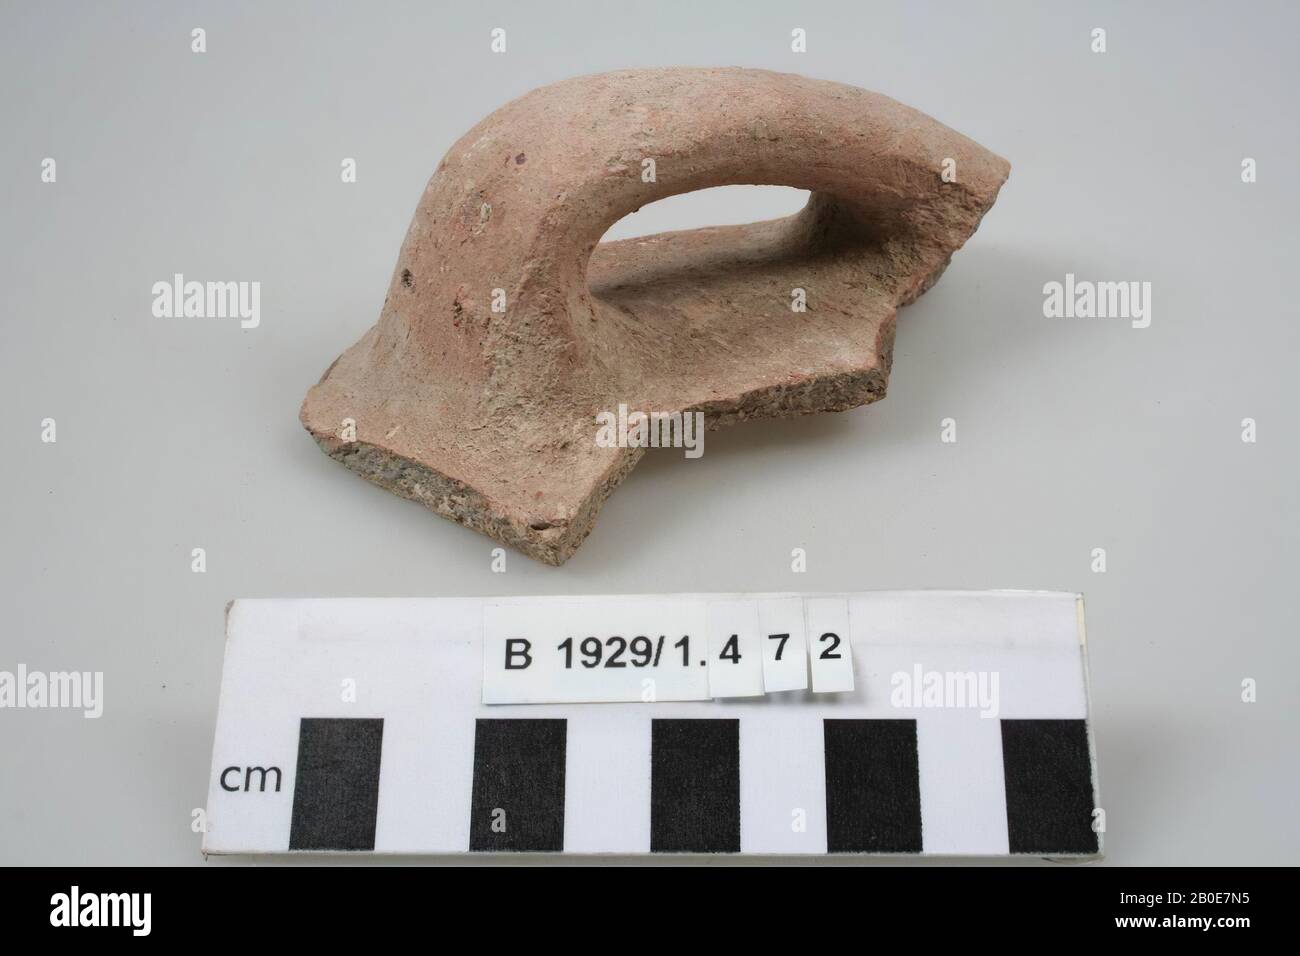 An ear of a jug, marked with two dots., Crockery, earthenware, L 13 cm, Palestine Stock Photo